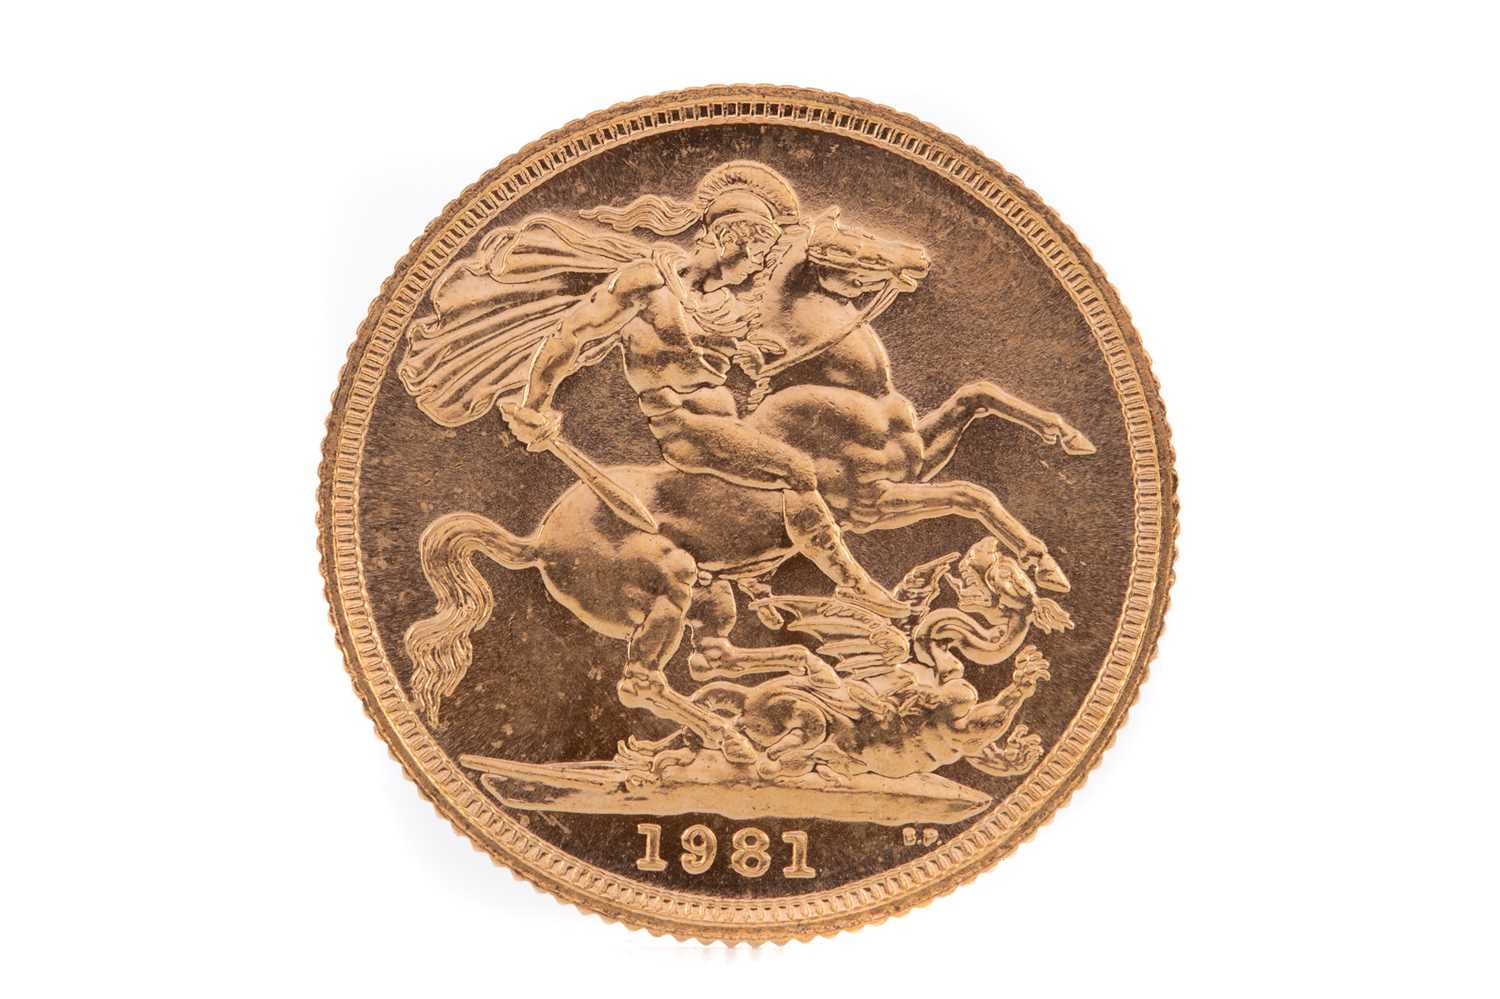 Lot 92 - AN ELIZABETH II GOLD SOVEREIGN DATED 1981